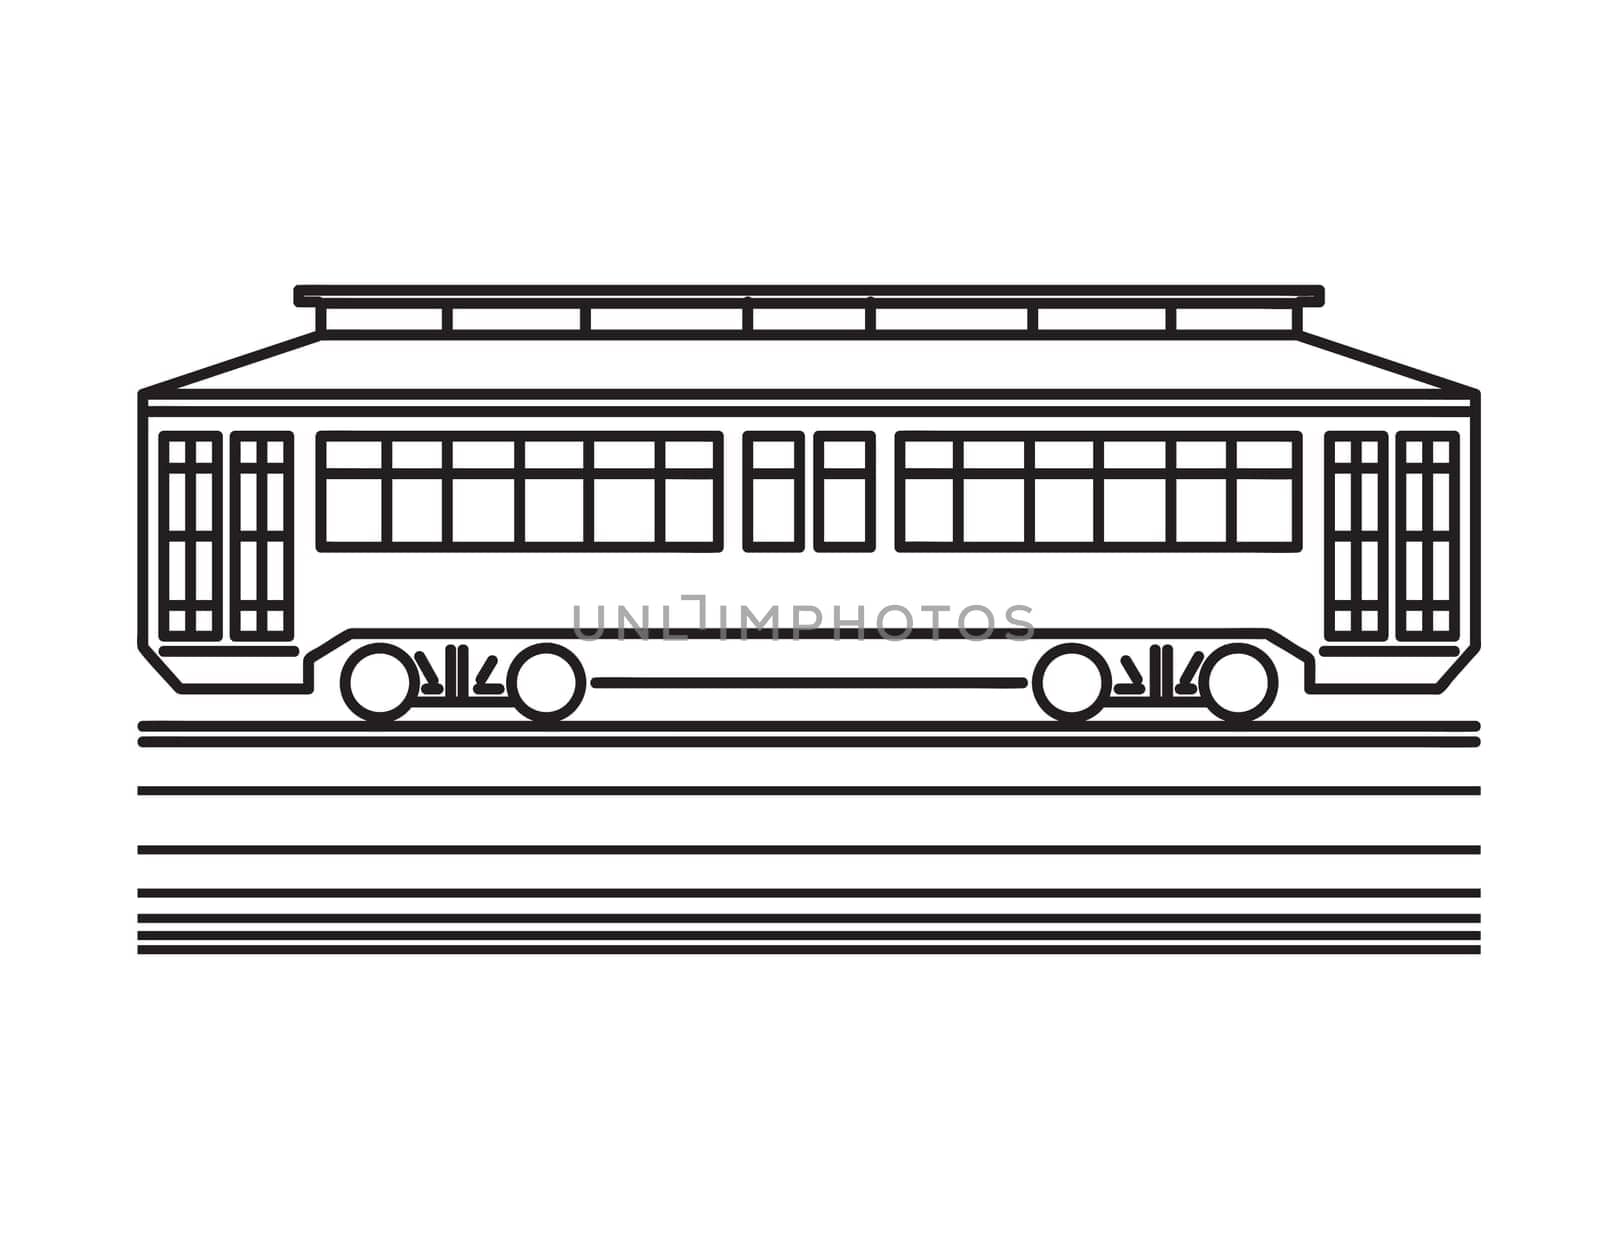 Mono line illustration of a streetcar or trolley car viewed from side done in monoline line art black and white style.
